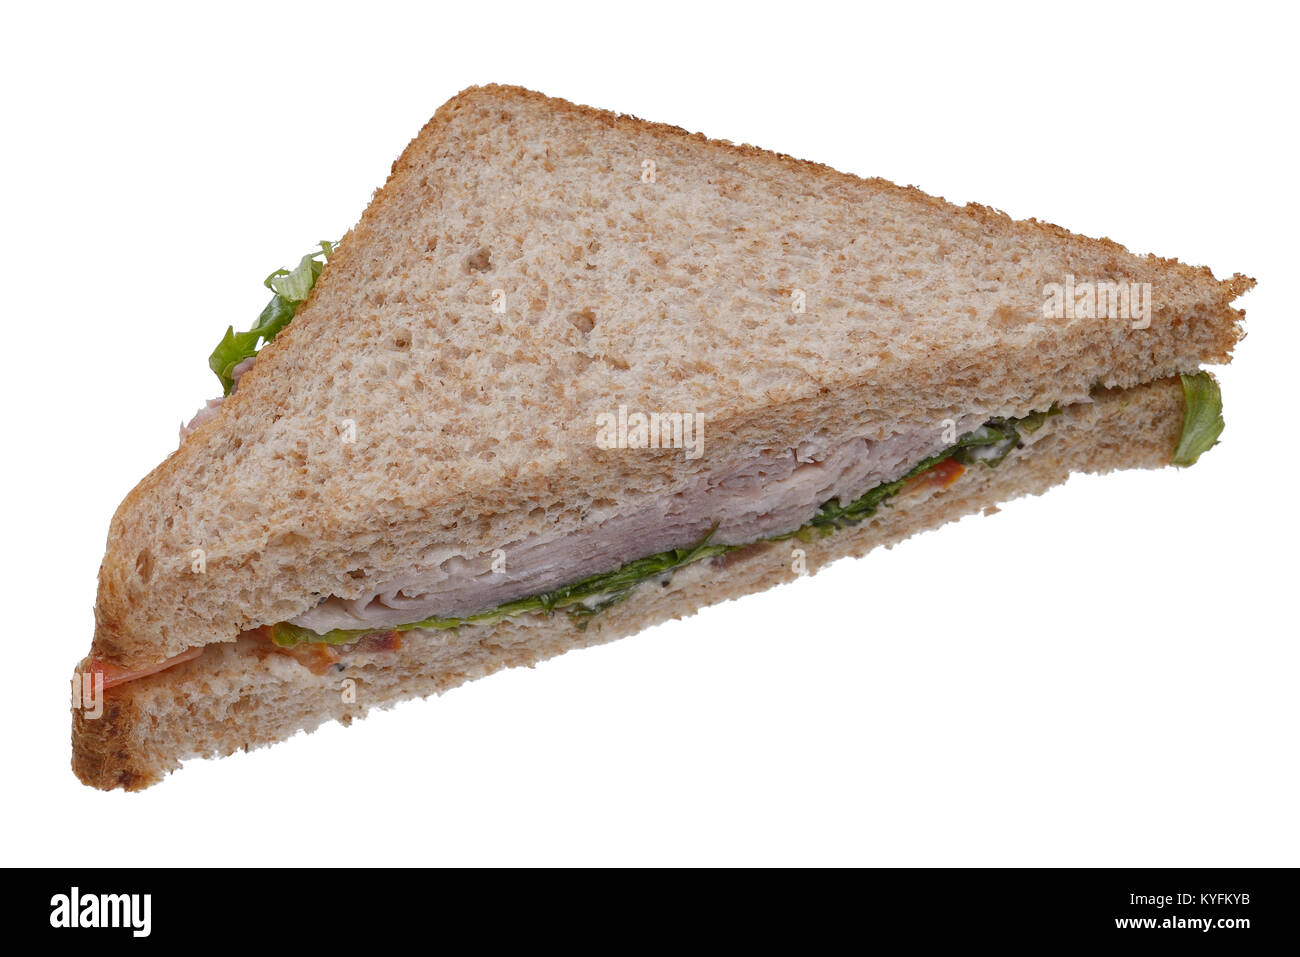 Shop bought ham and salad sandwich on brown bread Stock Photo